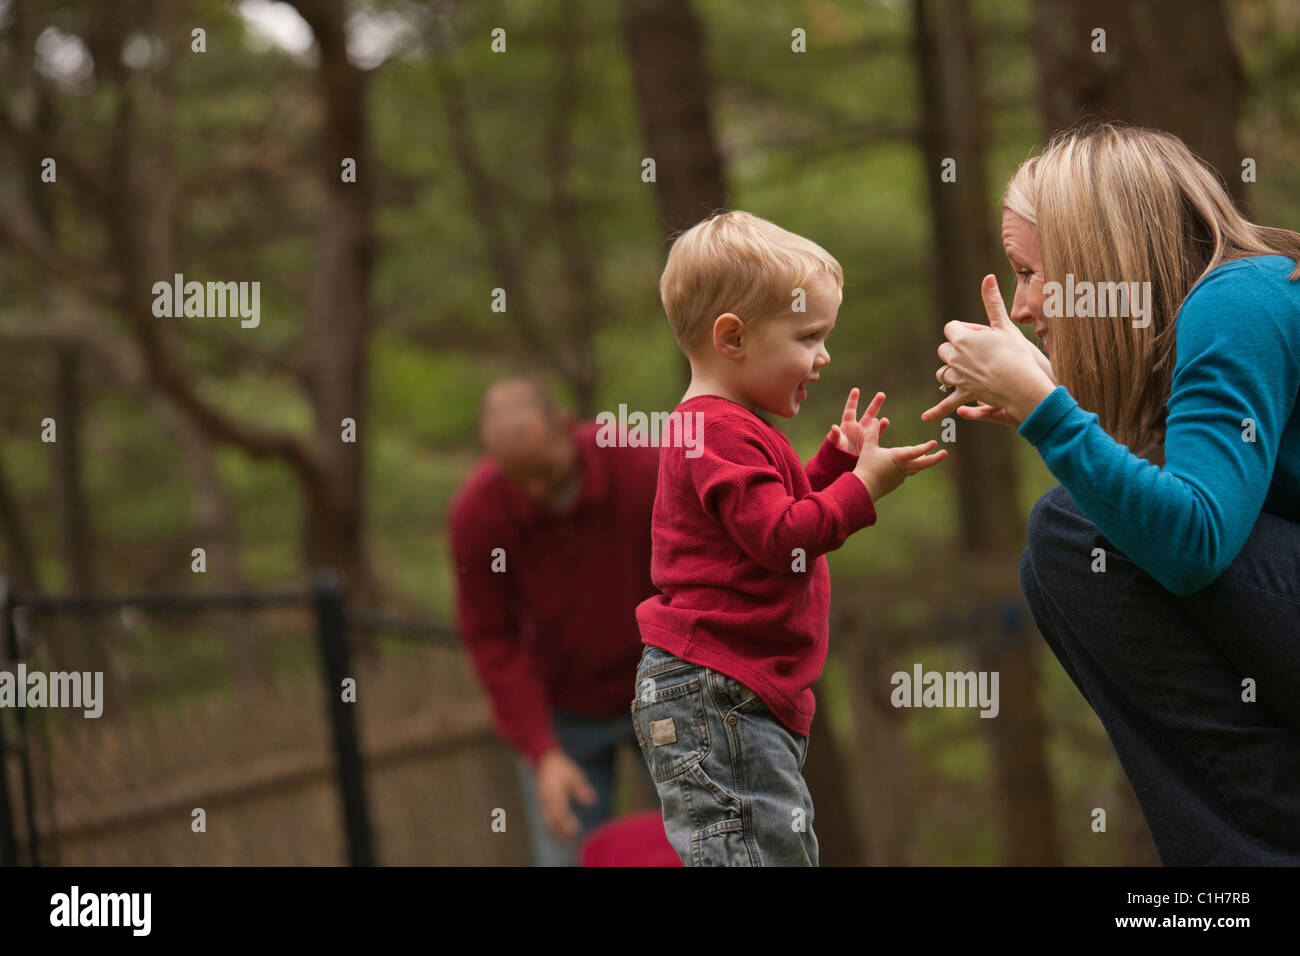 Woman signing the word 'Play' in American Sign Language while communicating with her son in a park Stock Photo